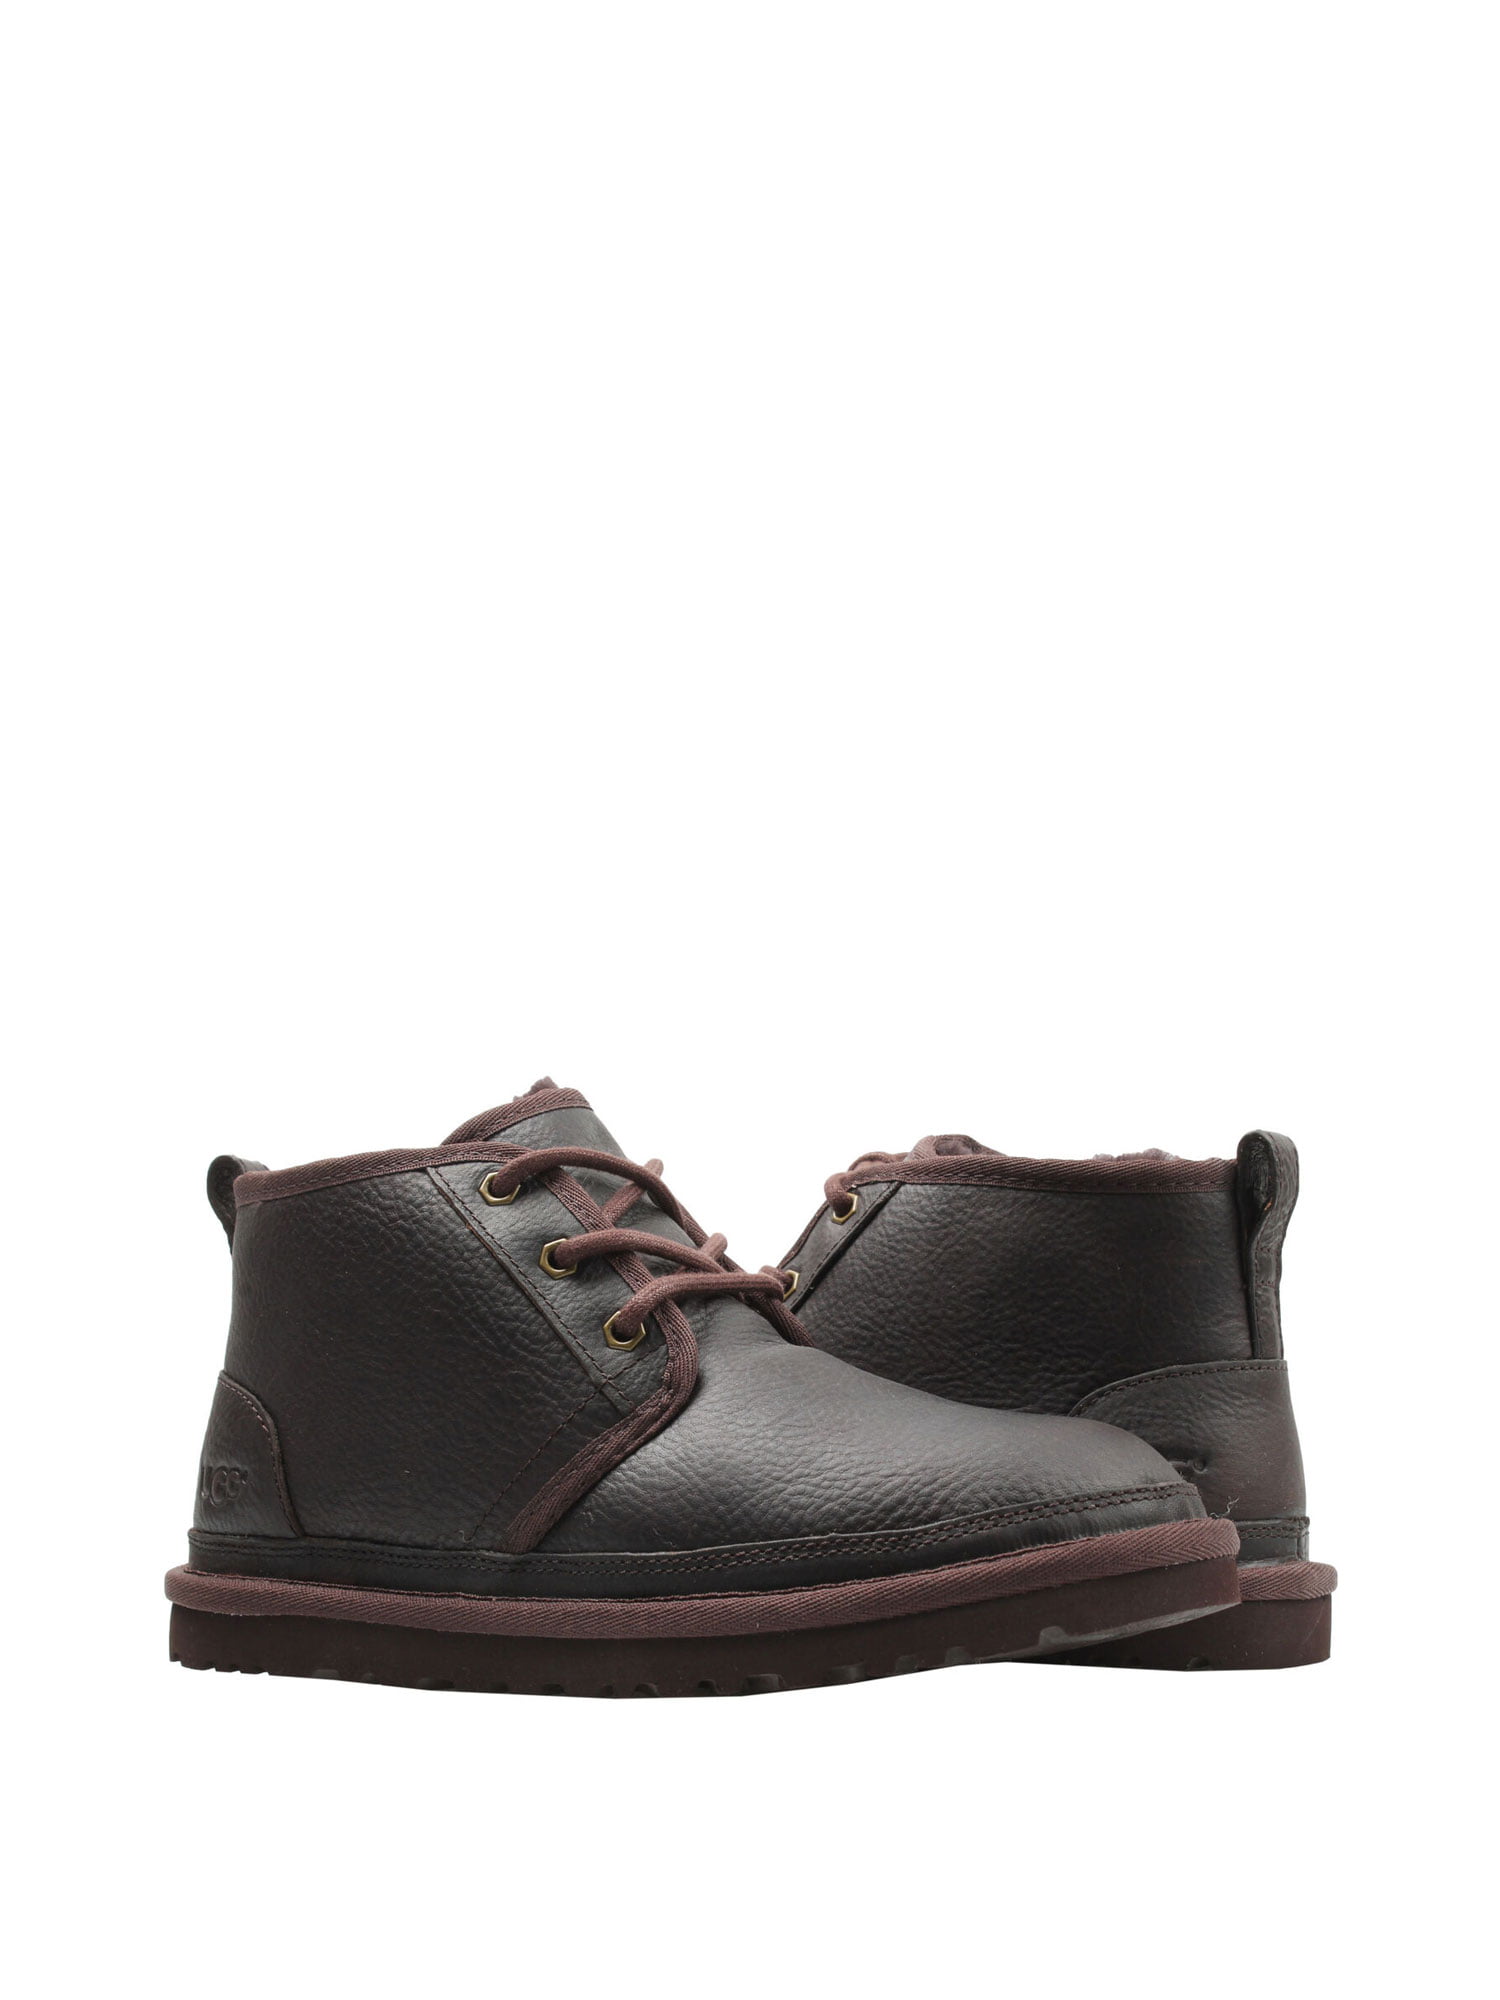 leather uggs mens